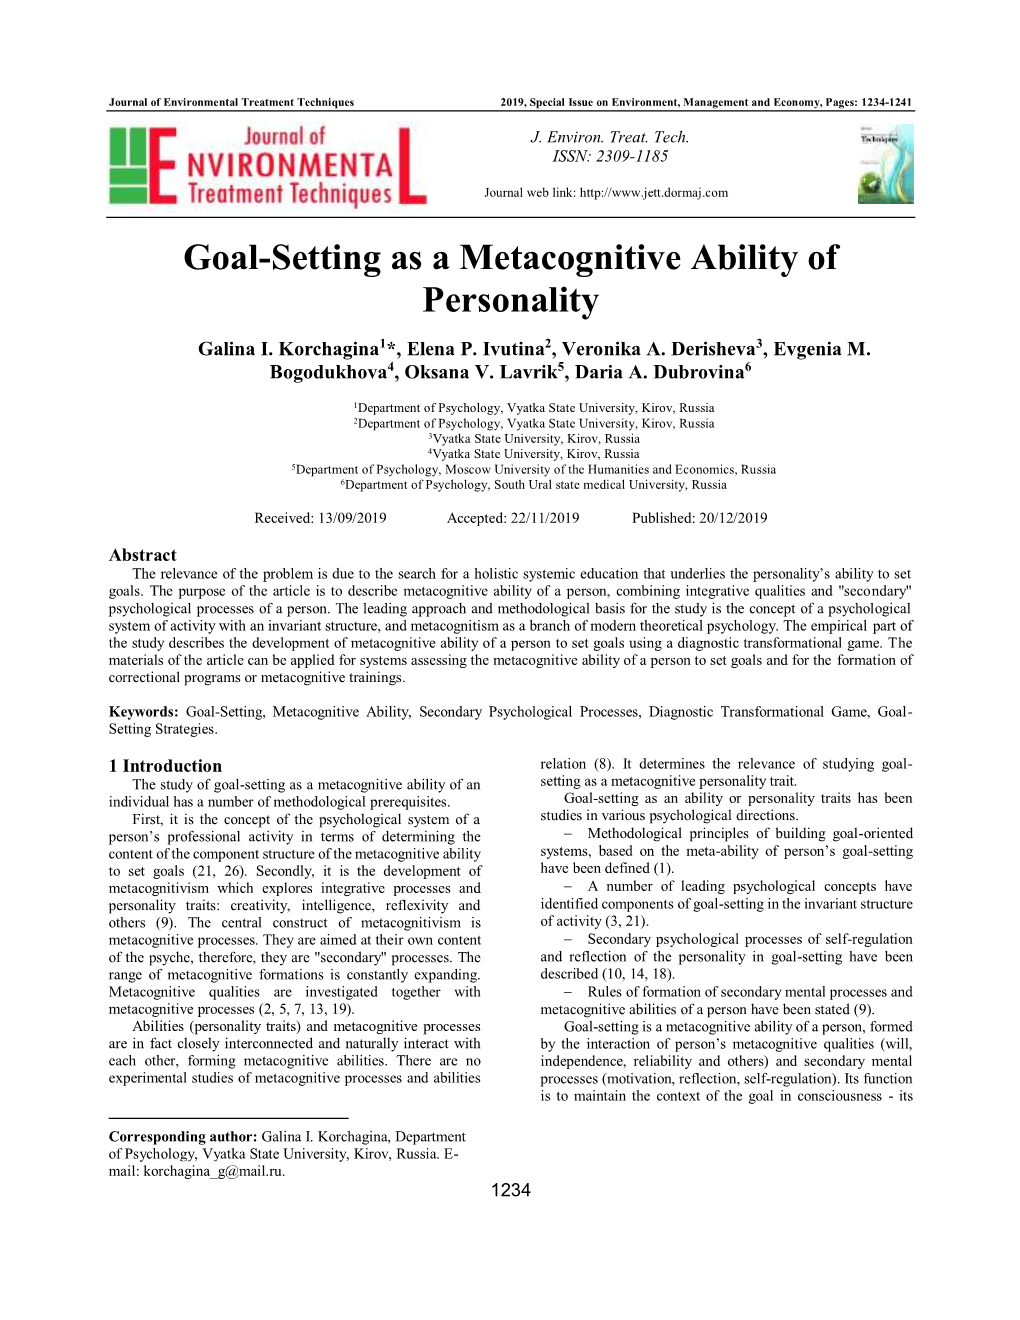 Goal-Setting As a Metacognitive Ability of Personality